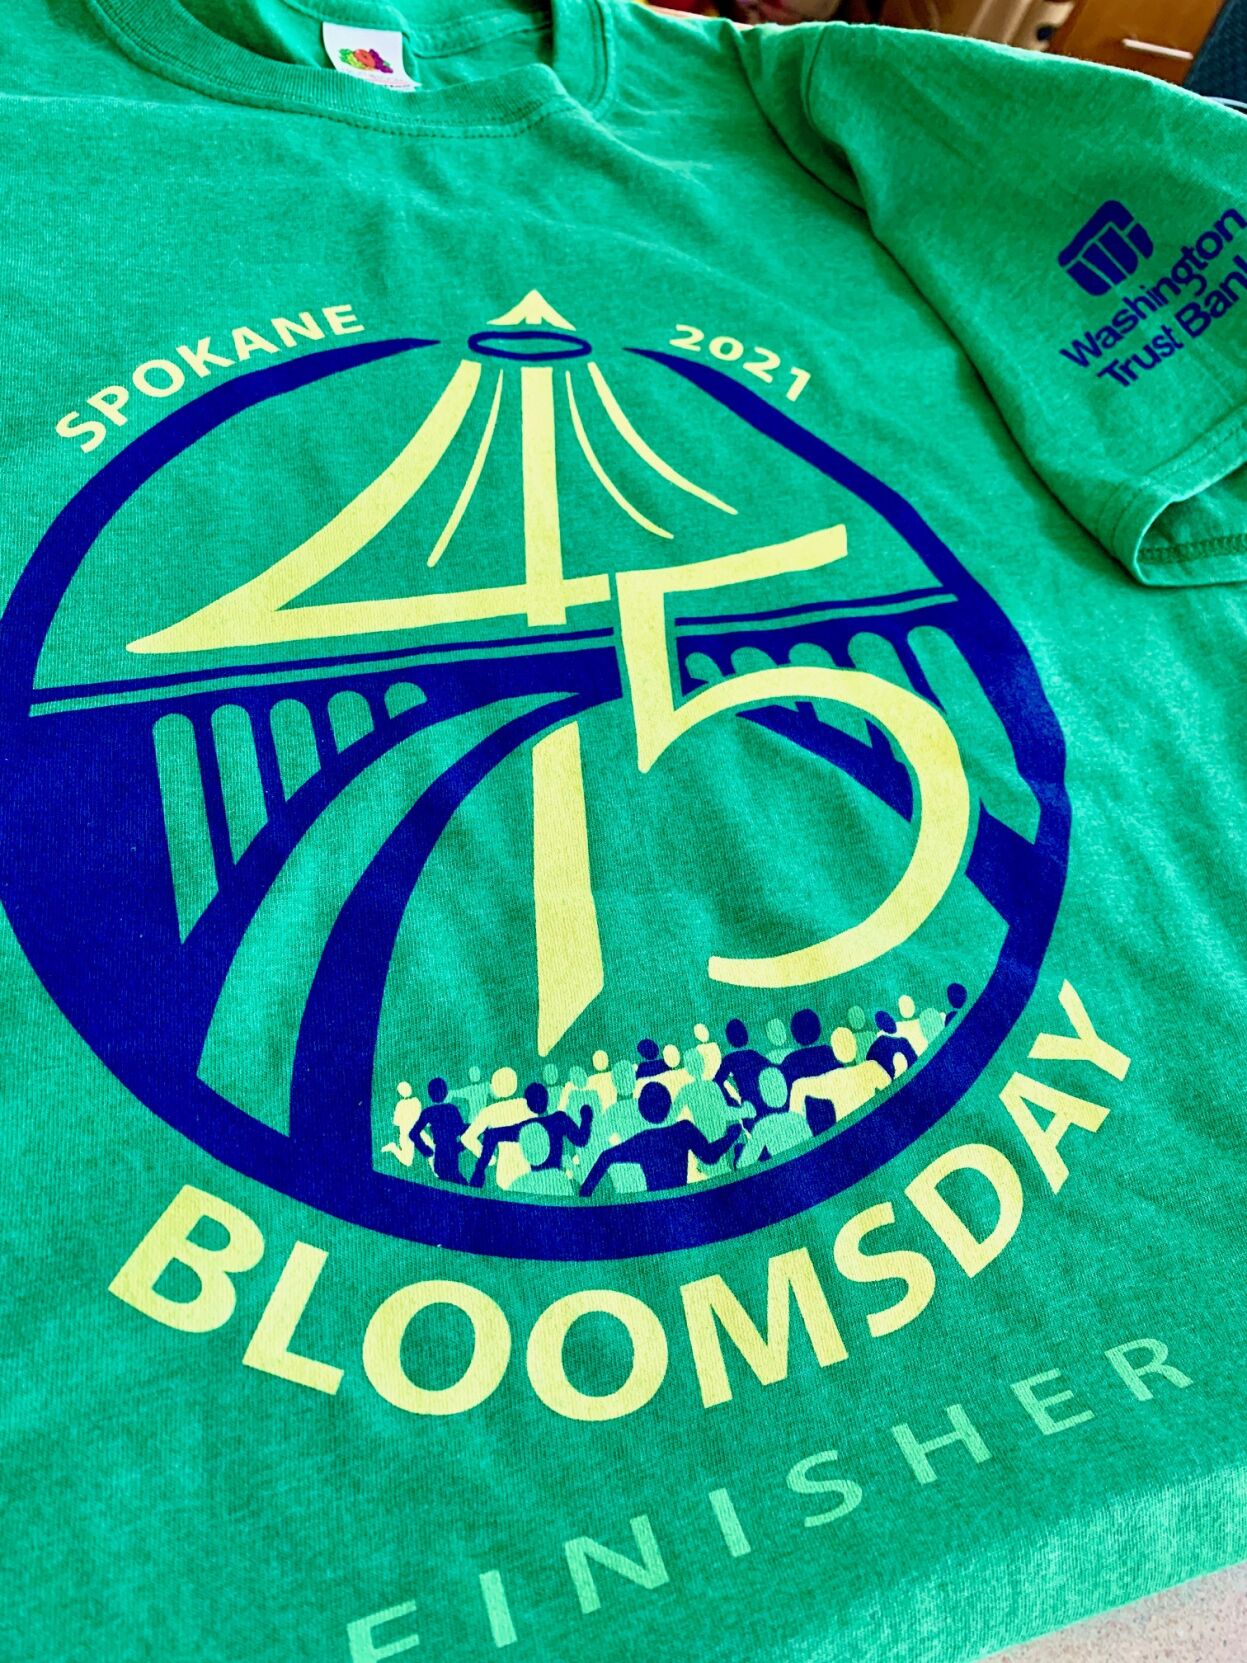 Sept. 17 last day to submit Bloomsday finisher tshirt design Find It